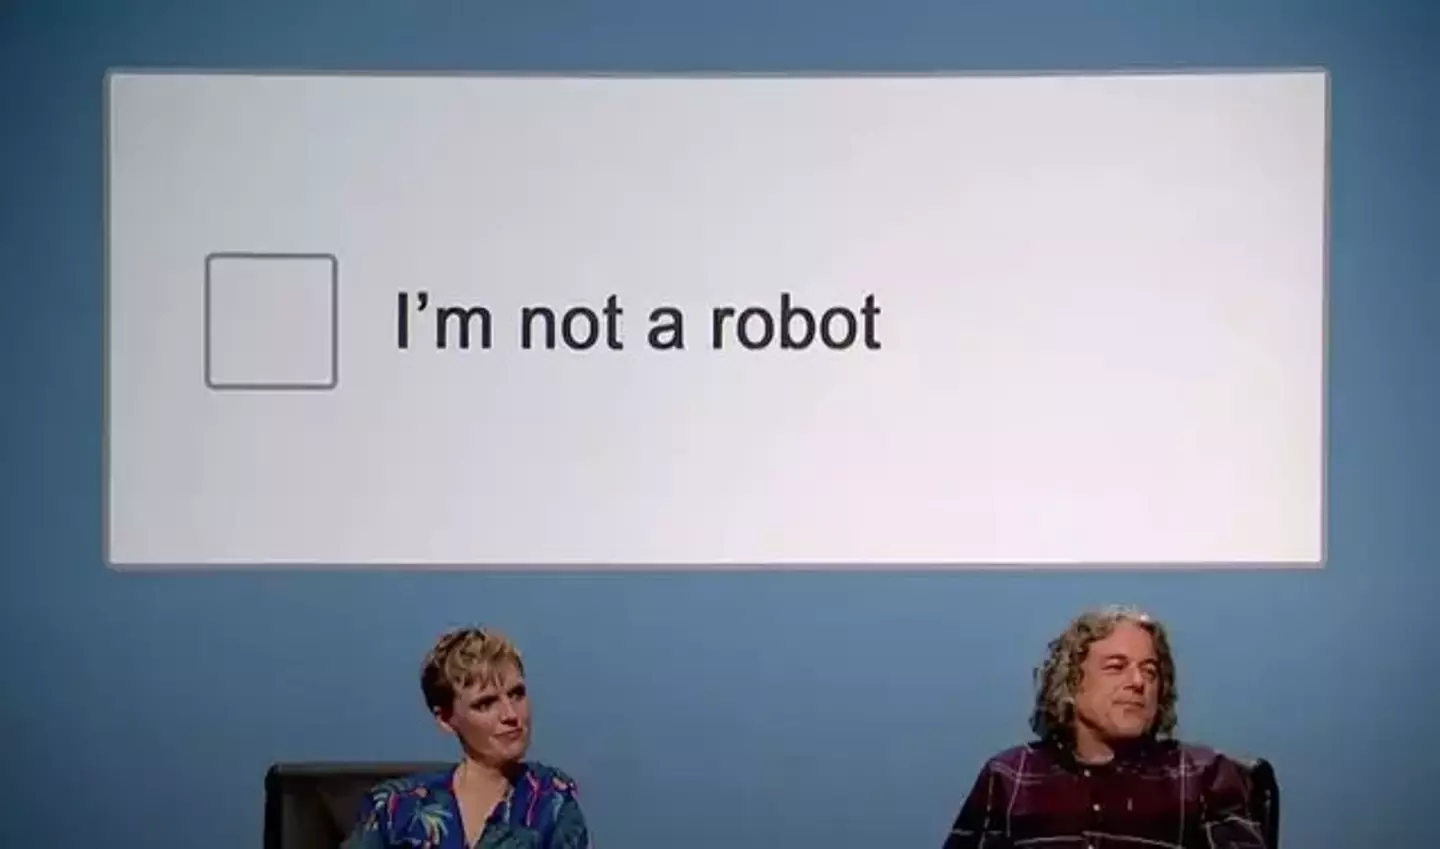 QI discussing what 'I am a robot' means.